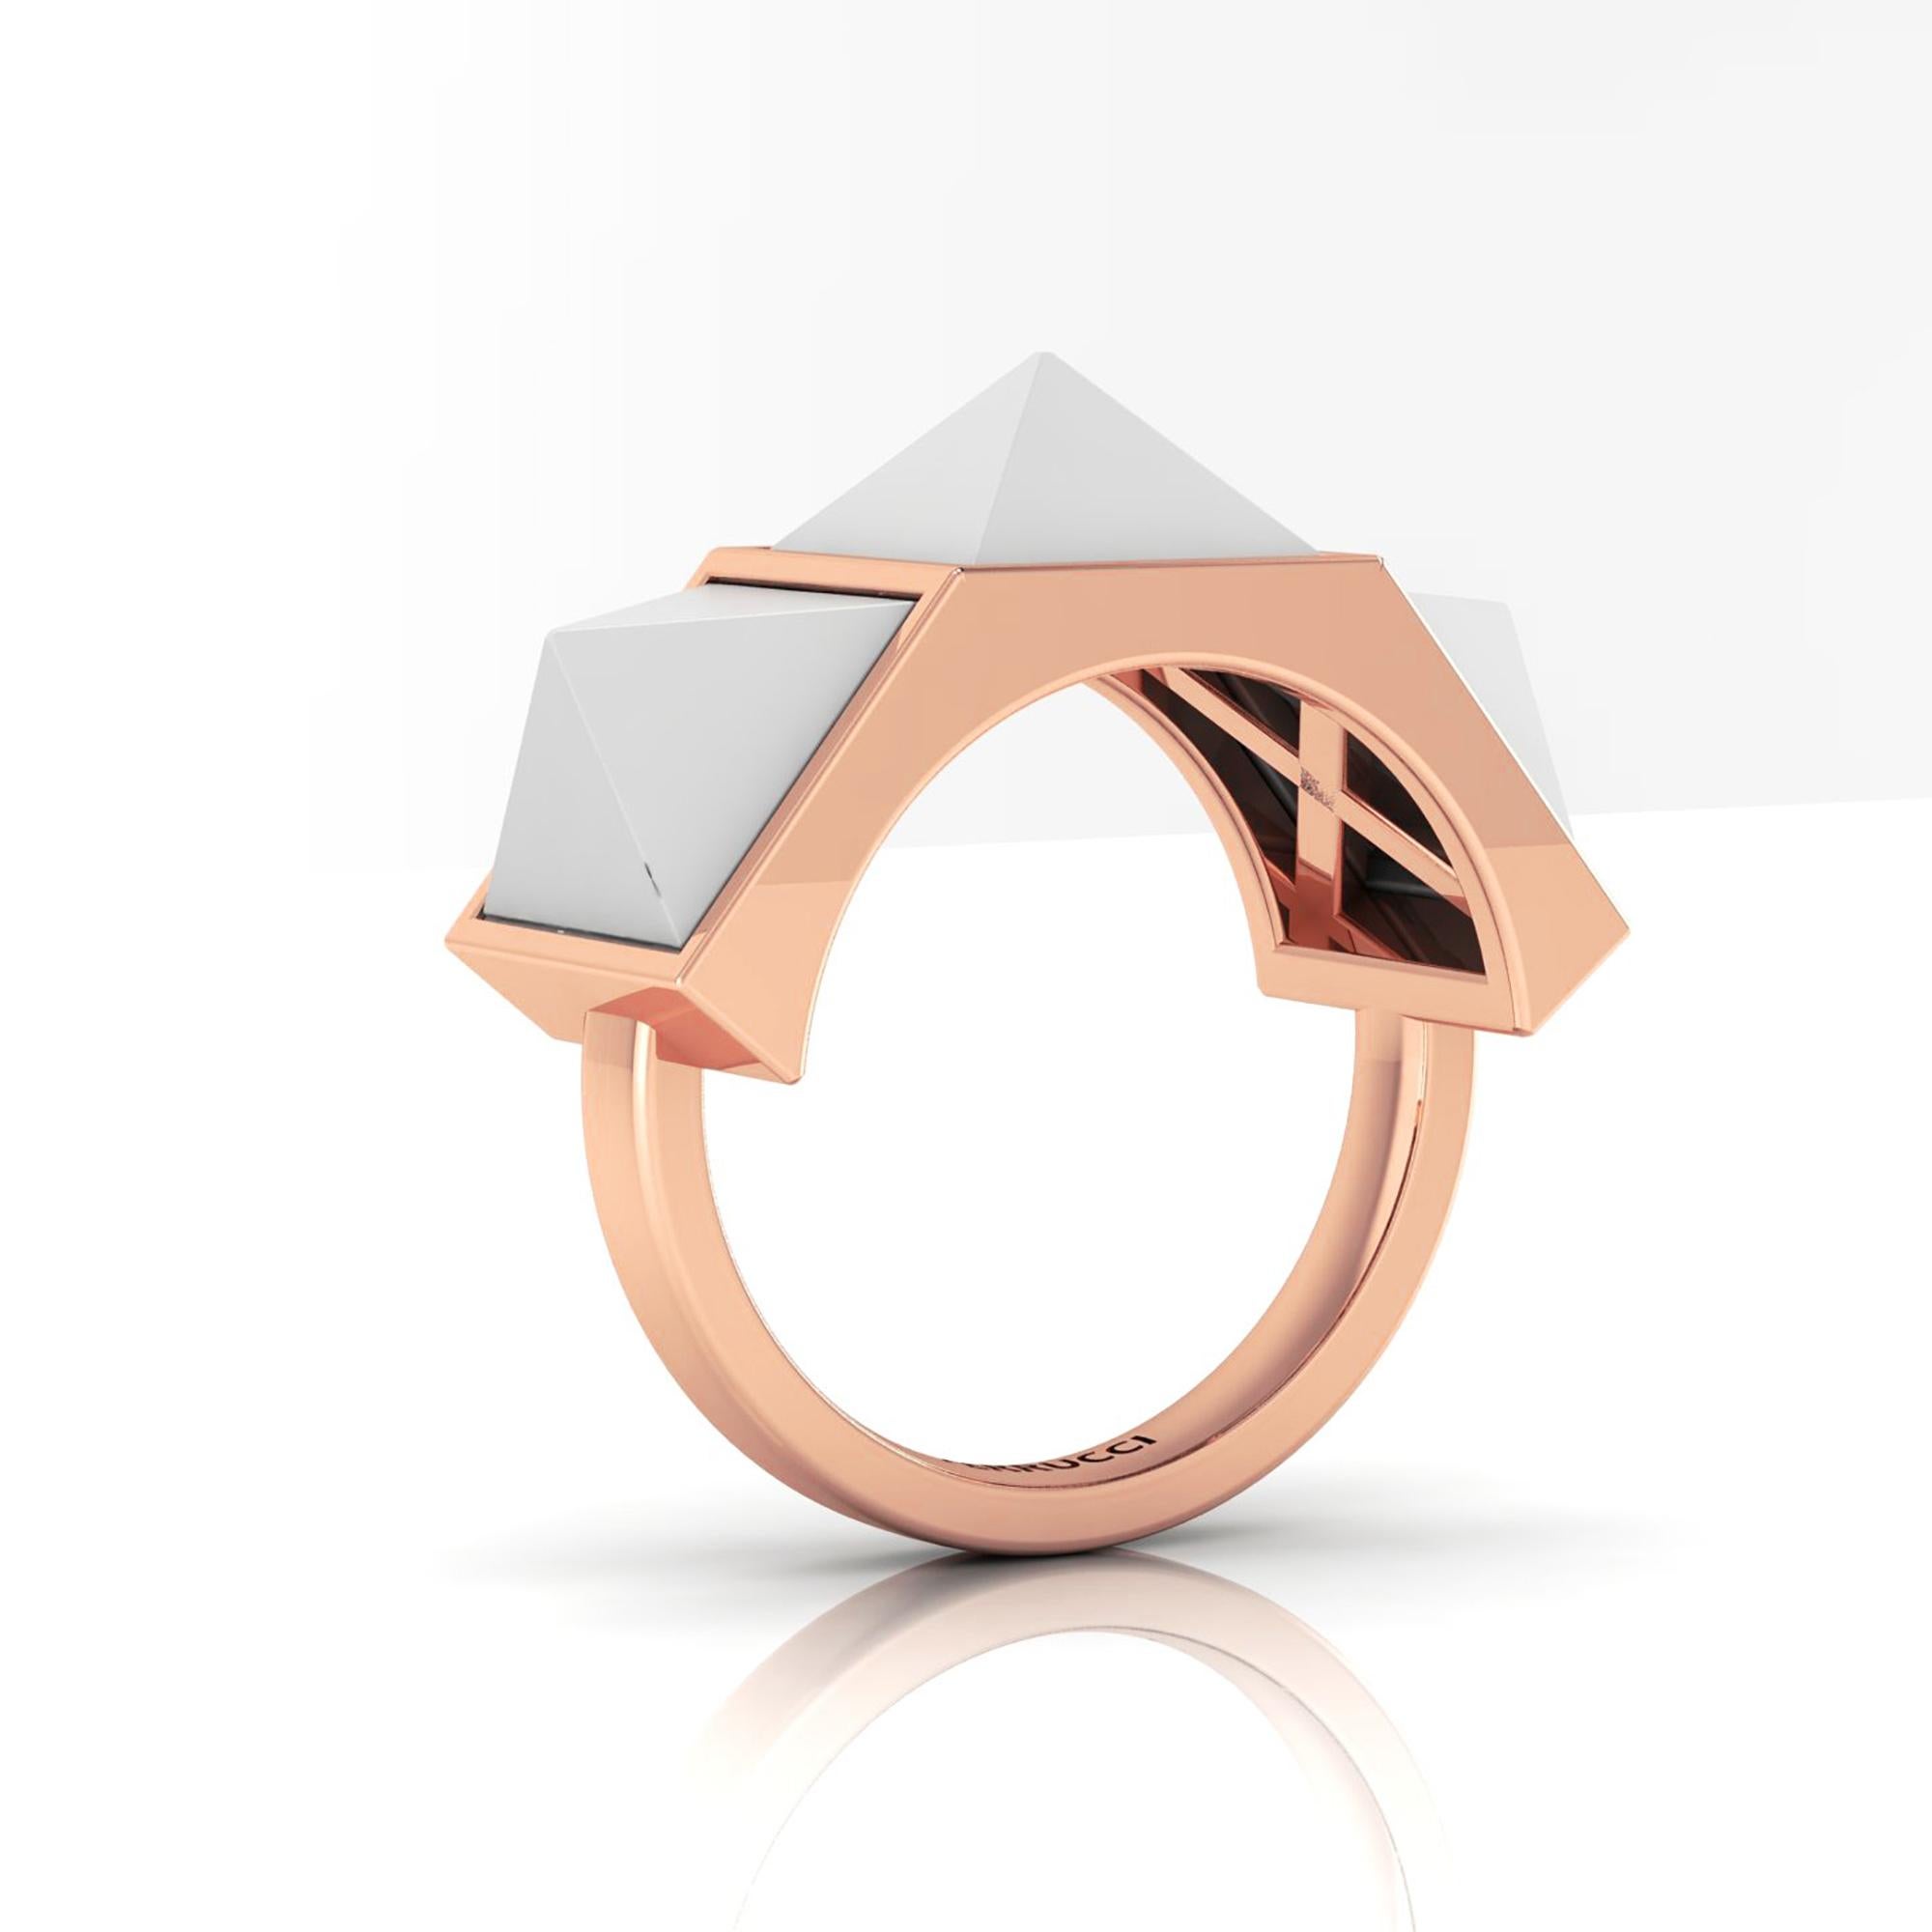 FERRUCCI Pyramid collection, the Three White agate Pyramids ring in 18k rose gold, made in New York

Agate's most noticeable overall properties are balancing yin/yang energy, courage, protection, healing and calming with the Pyramid attracting